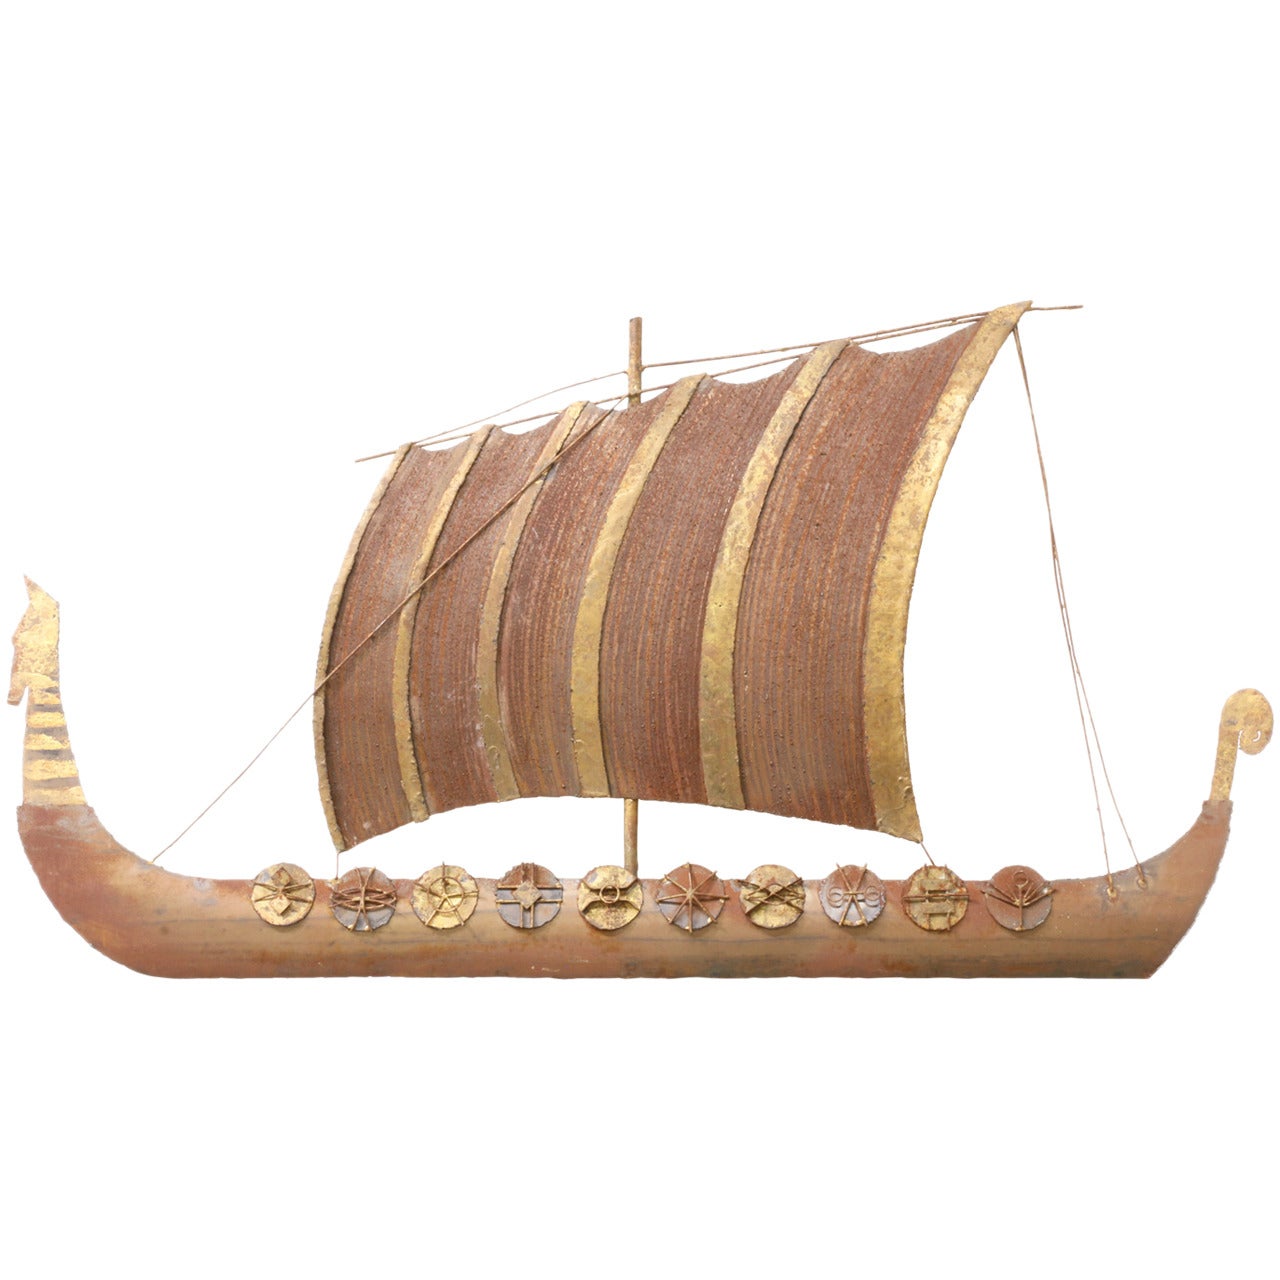 Peter Pepper Products Viking Sail Boat Wall Art Sculpture